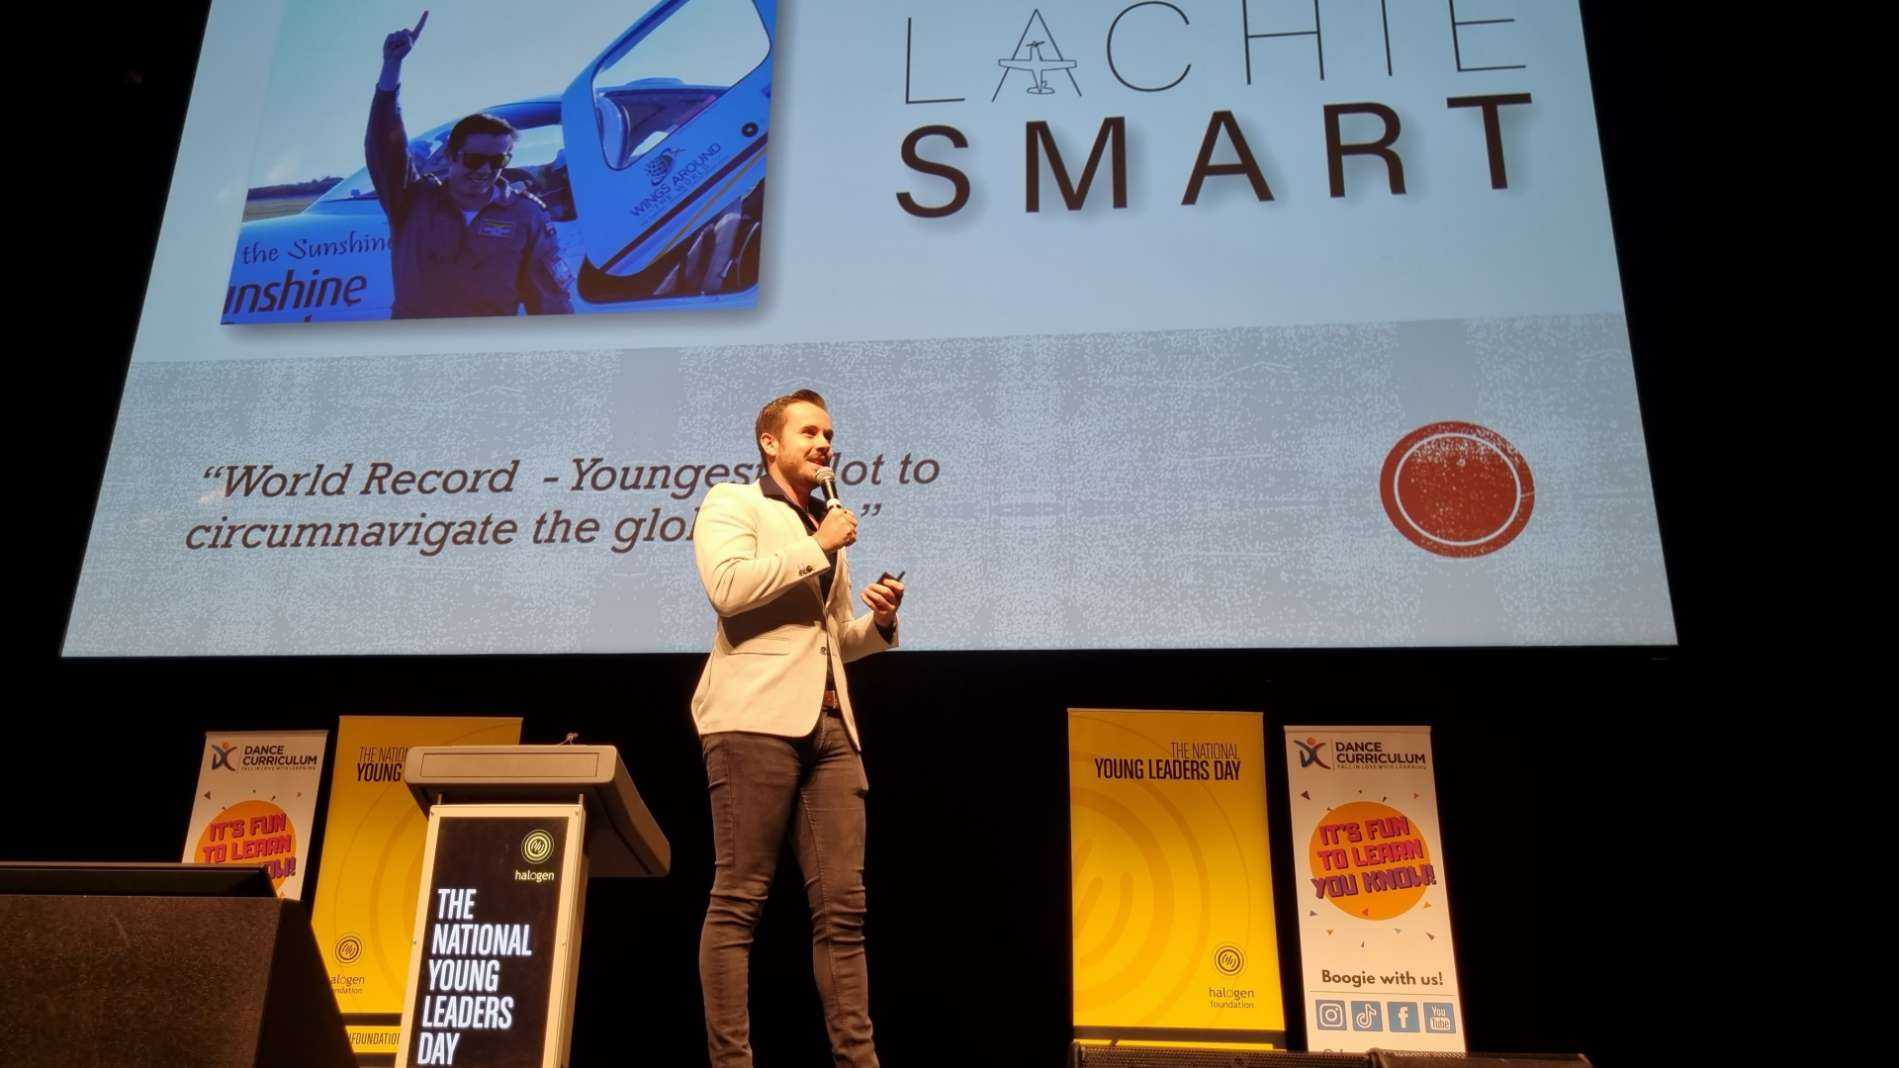 Lachie Smart - Young Leaders Conference 2022